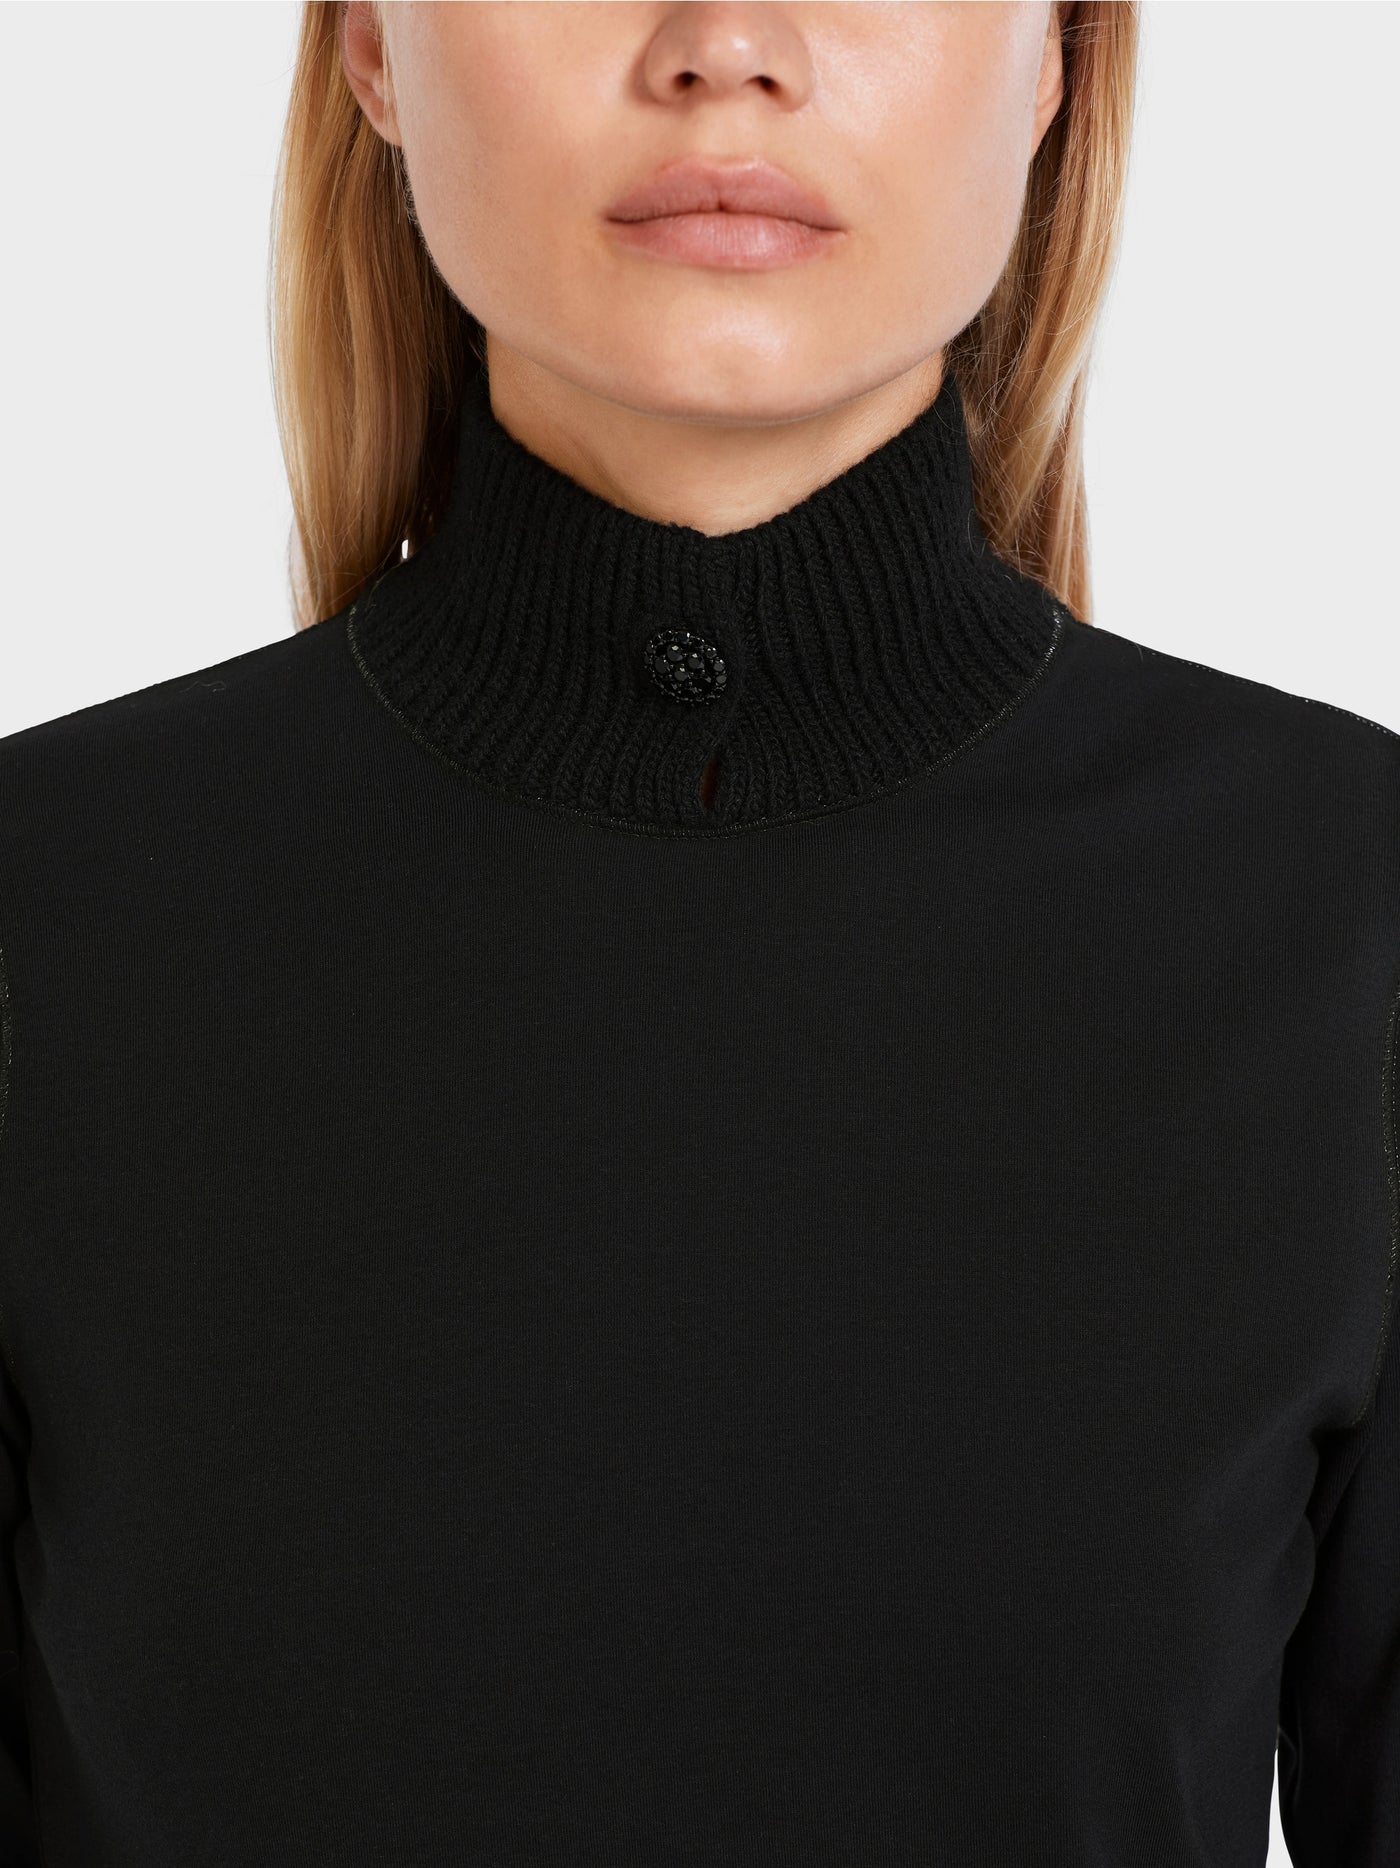 Long Sleeve with Material Mix in Black